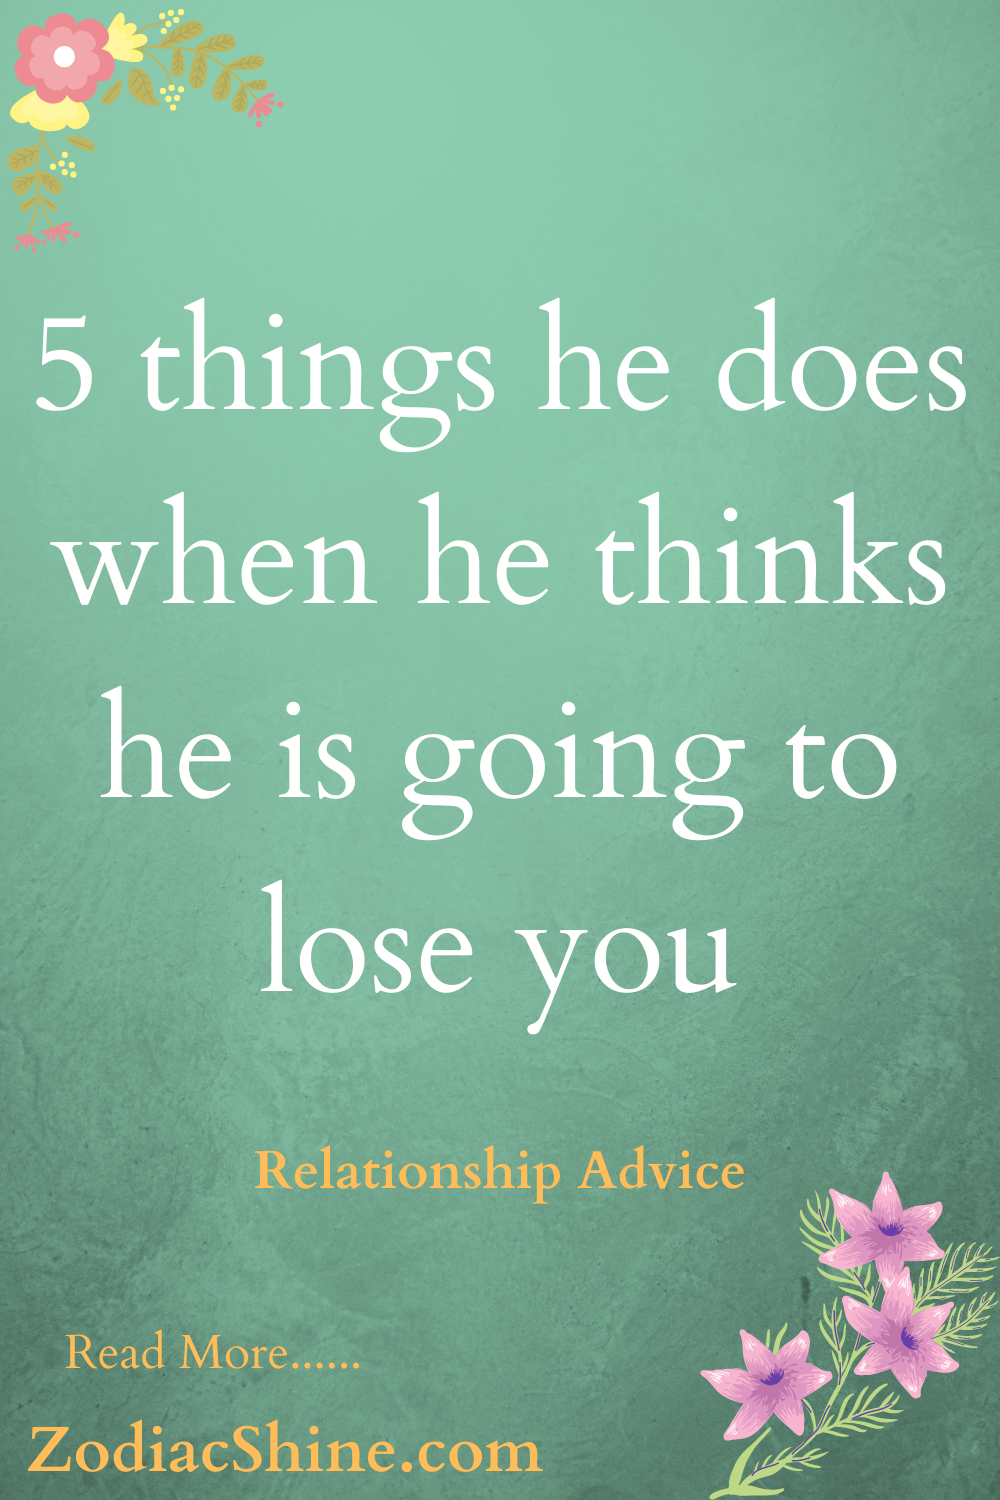 5 things he does when he thinks he is going to lose you